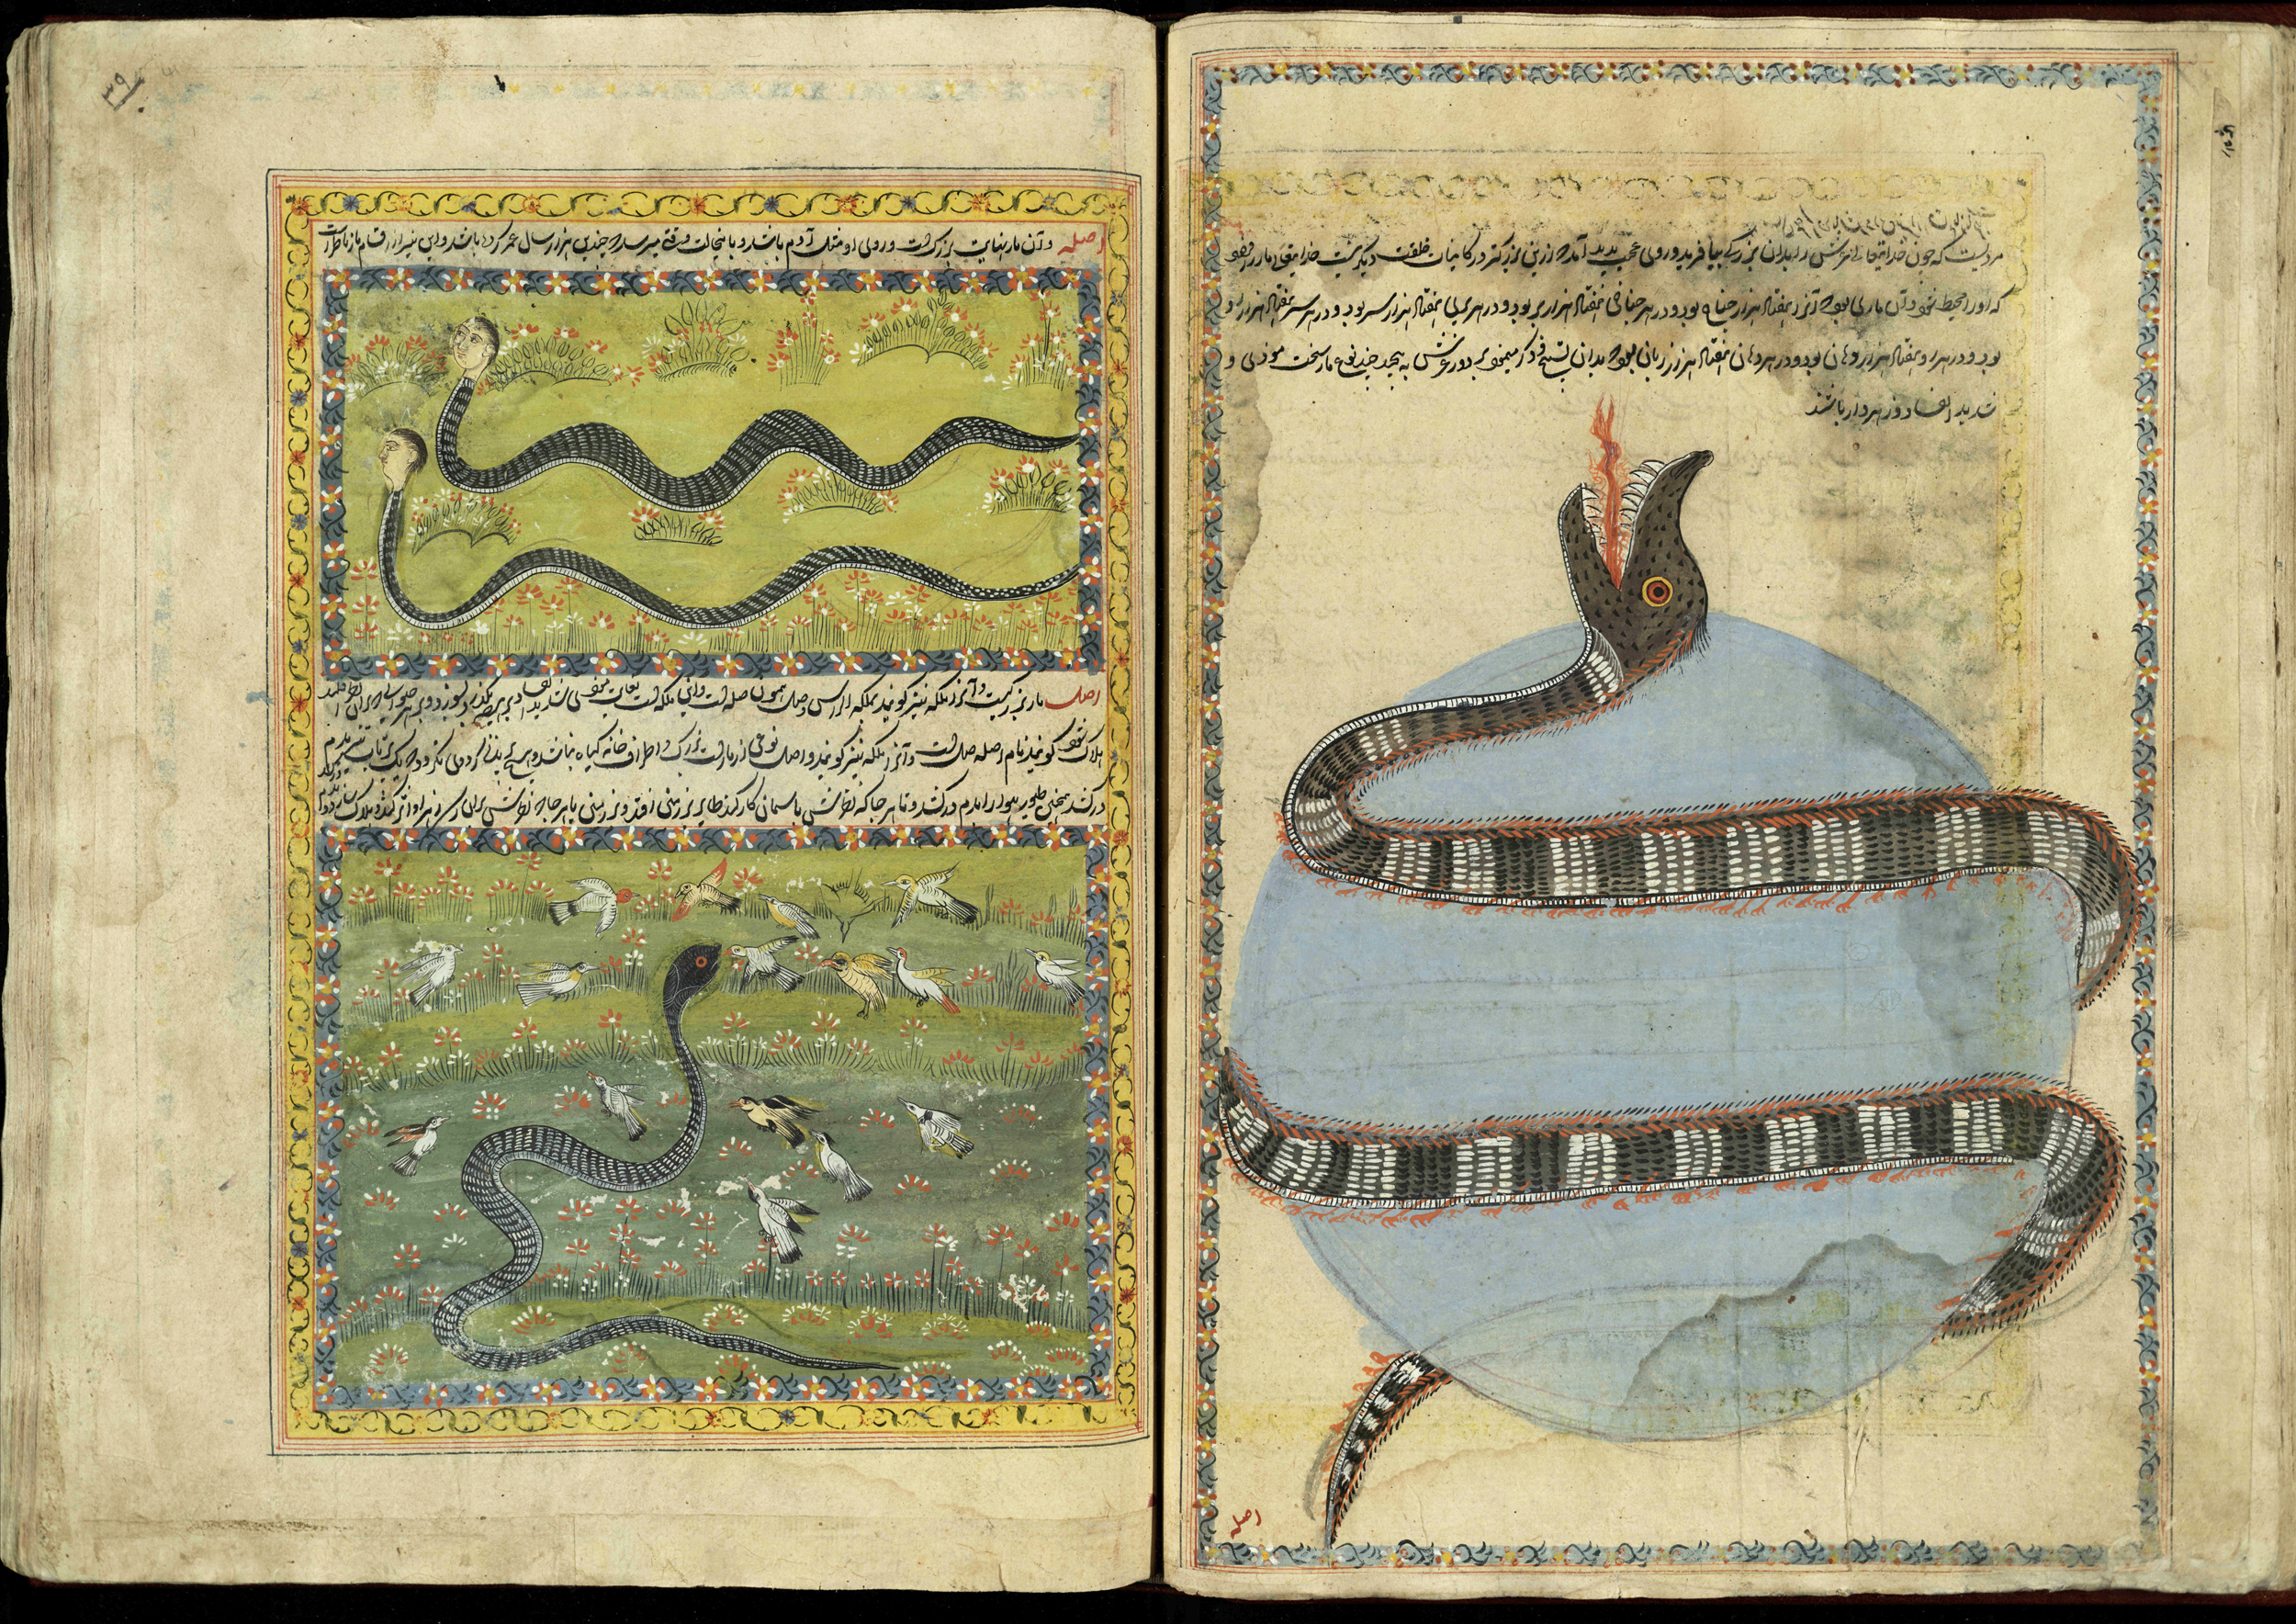 A snake wrapped around the world from 17th or 18th century manuscript copy of “The Book of Wonders of the Age” (St Andrews ms32(o))